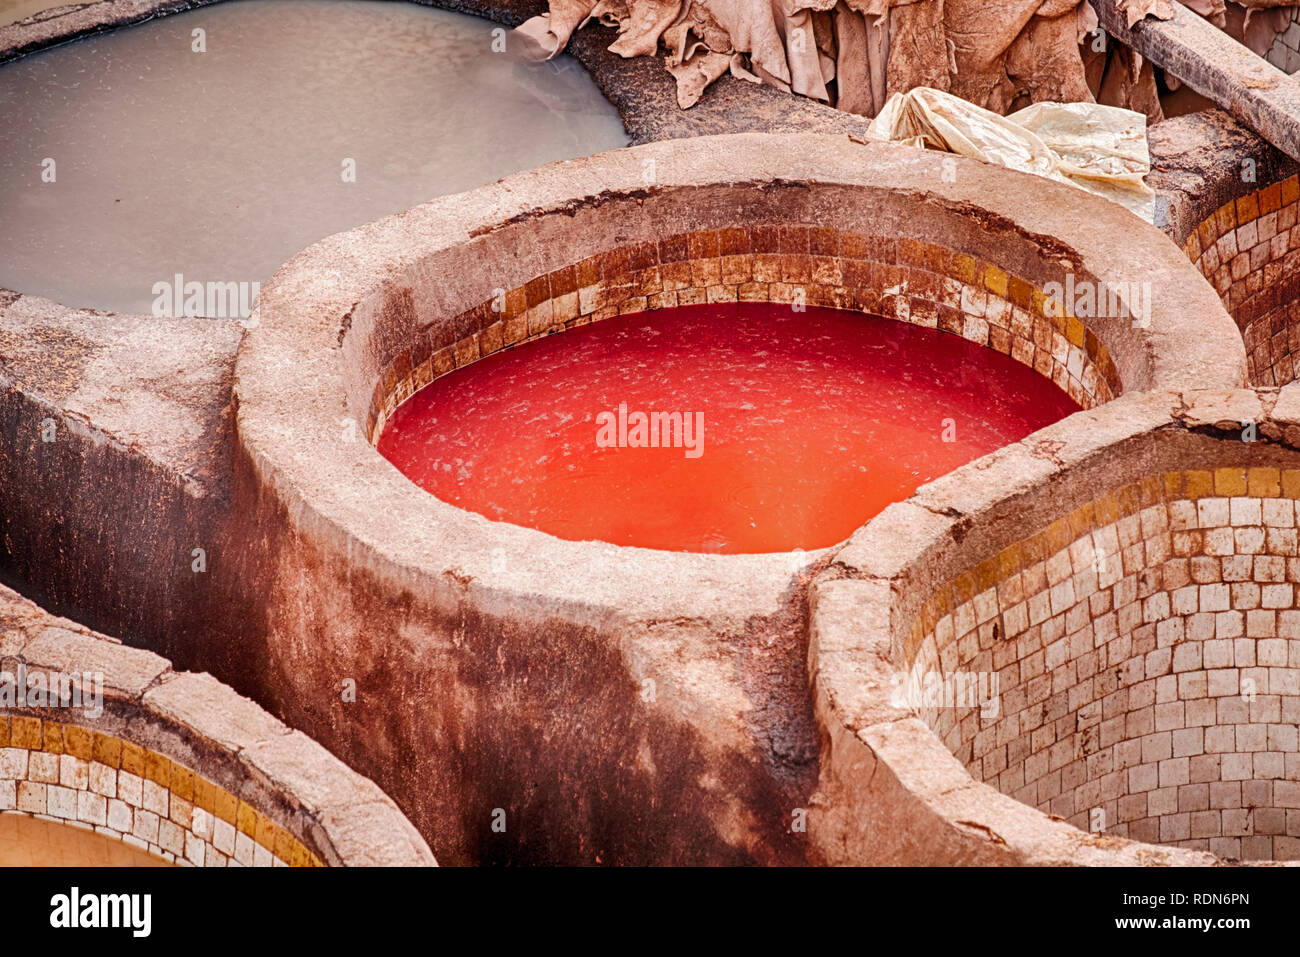 The outdoor leather tannery of Fes in Moroco contains hundreds of dye pits including some with bright red dyes. Stock Photo